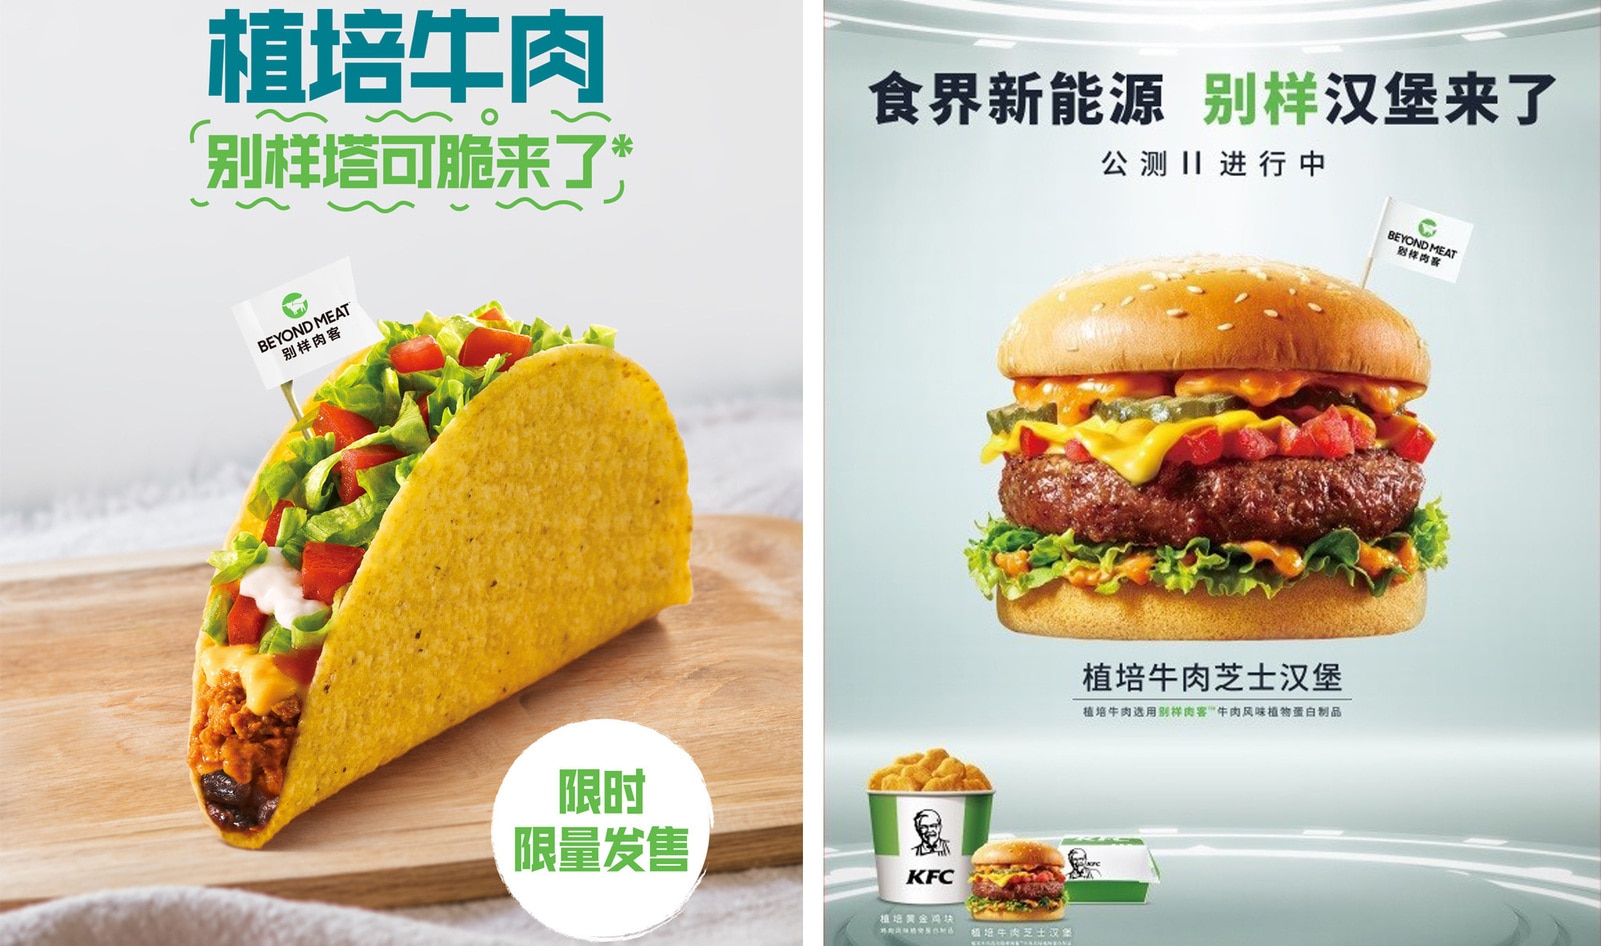 KFC, Taco Bell, and Pizza Hut Launch Beyond Burger in China